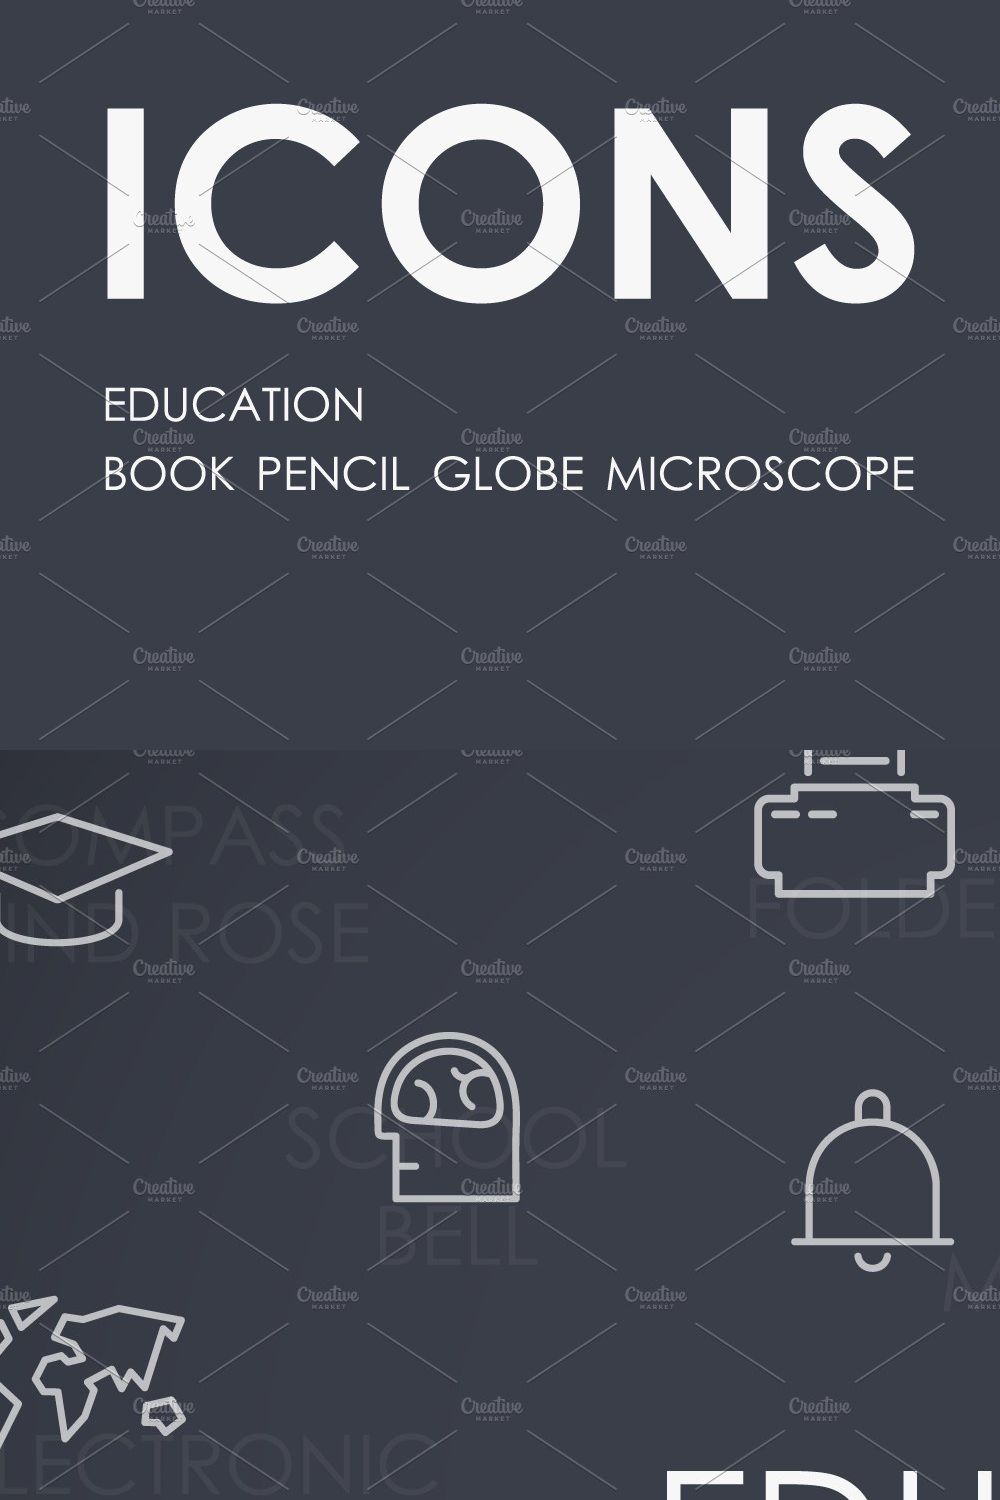 Education Thinline icons pinterest preview image.